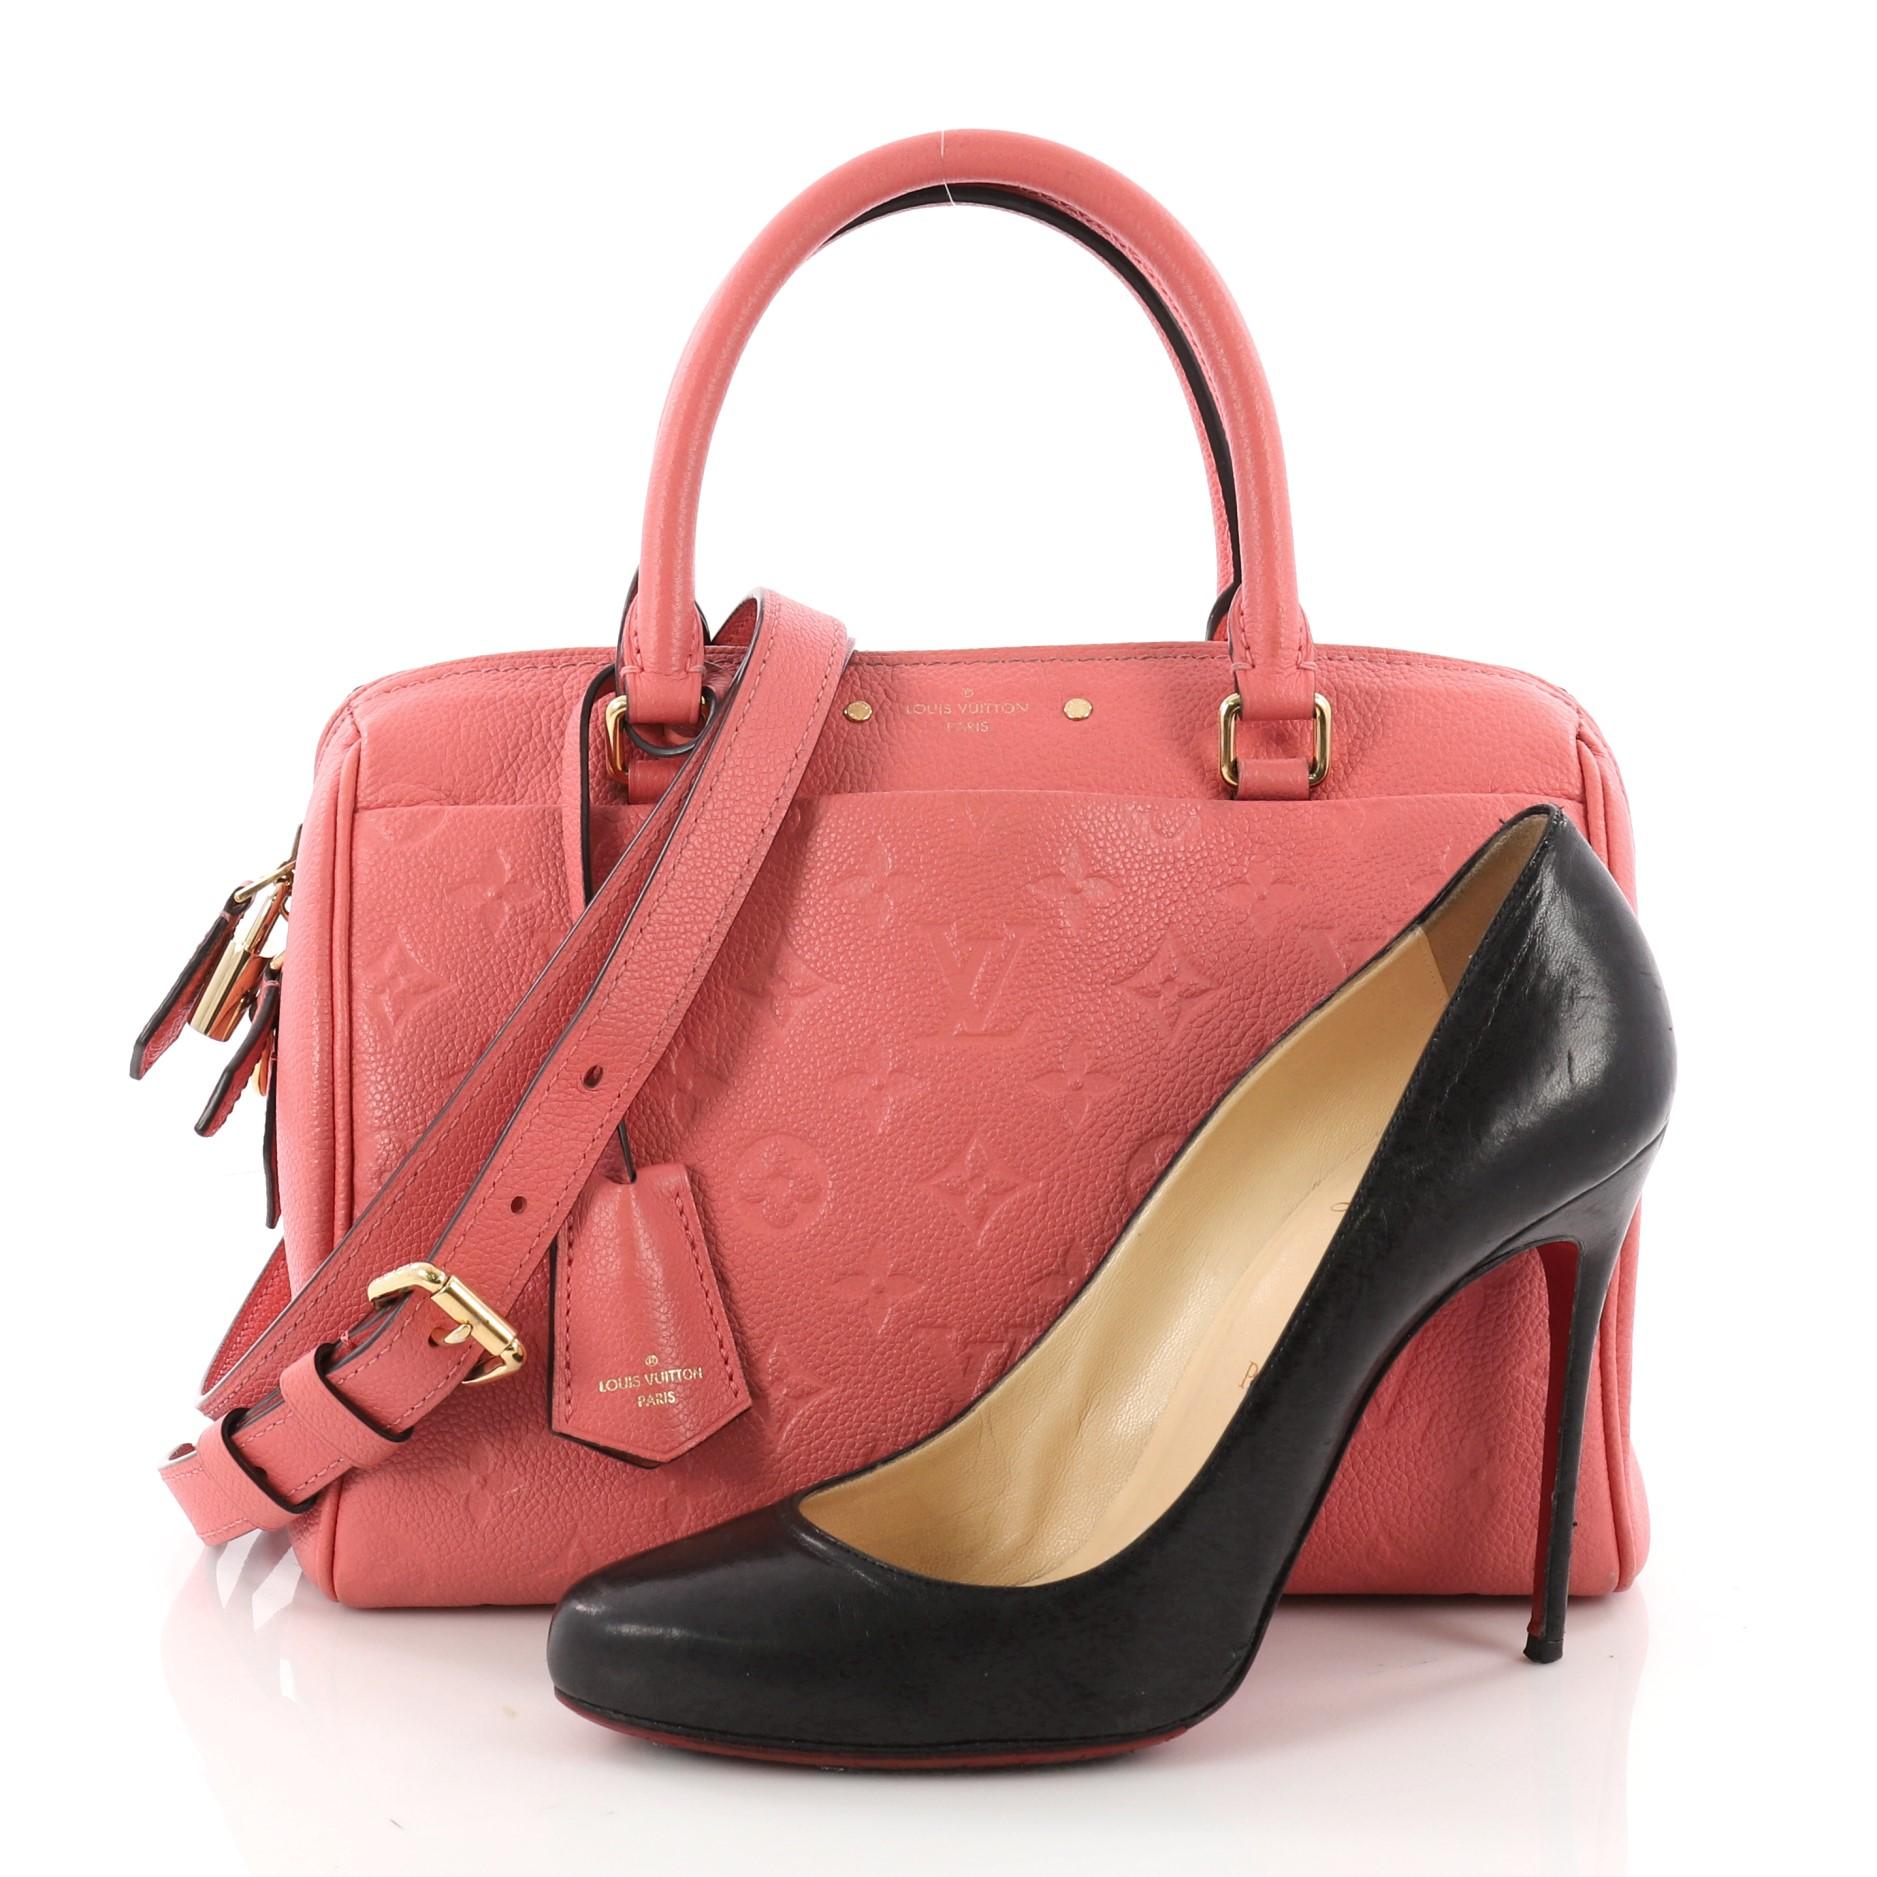 This authentic Louis Vuitton Speedy Bandouliere NM Handbag Monogram Empreinte Leather 25 is a modern must-have. Constructed from Louis Vuitton's luxurious pink monogram embossed empreinte leather, this iconic and re-imagined Speedy features